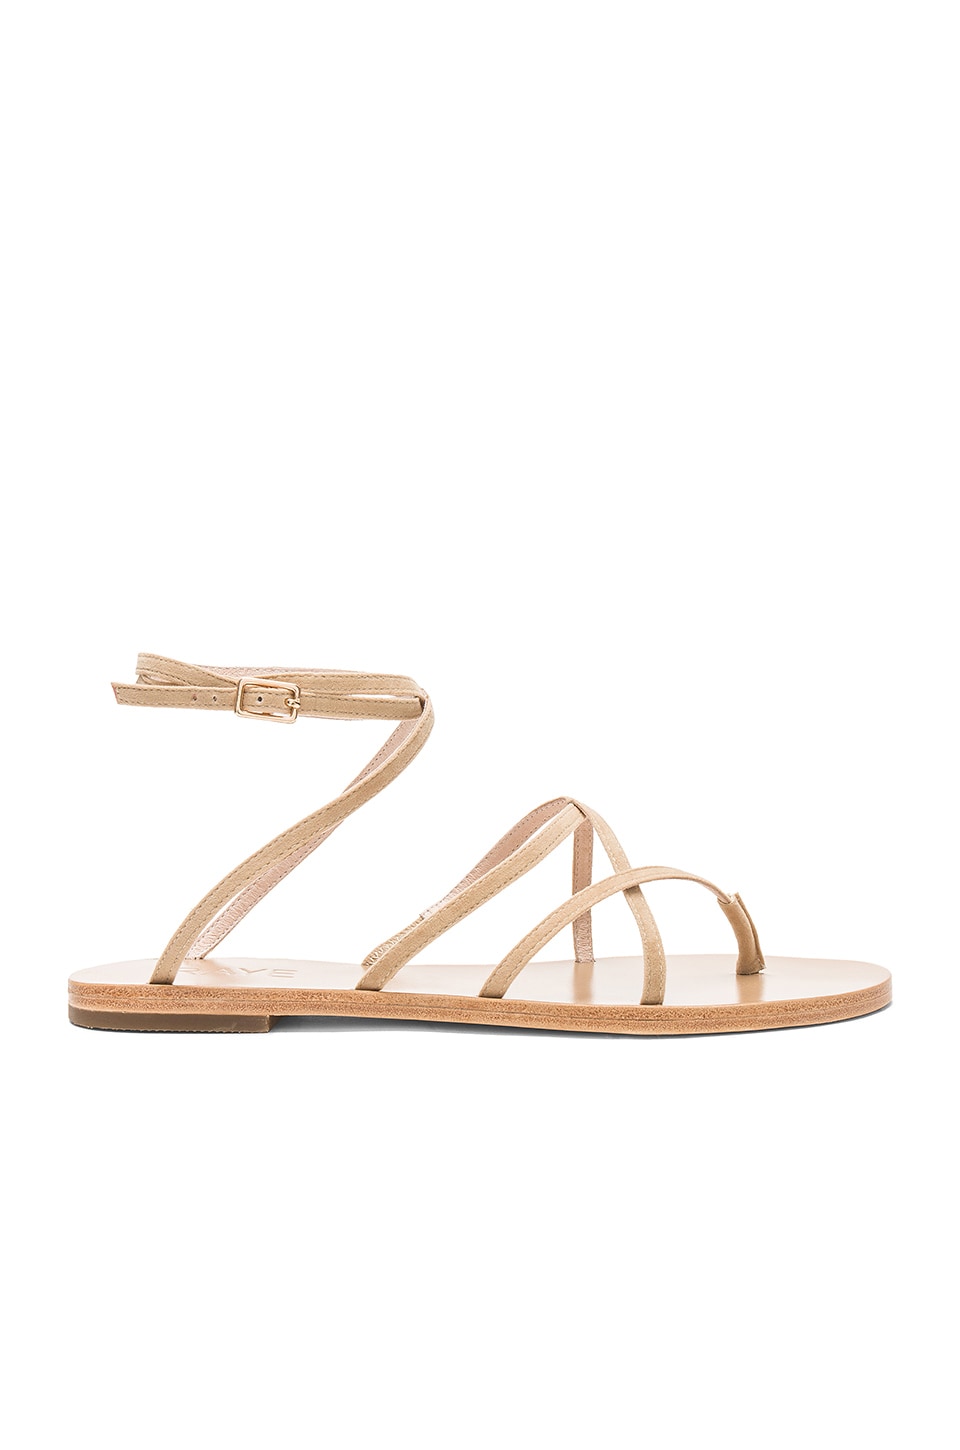 The Best Summer Work Shoes and Sandals, According to Vogue Editors | Vogue